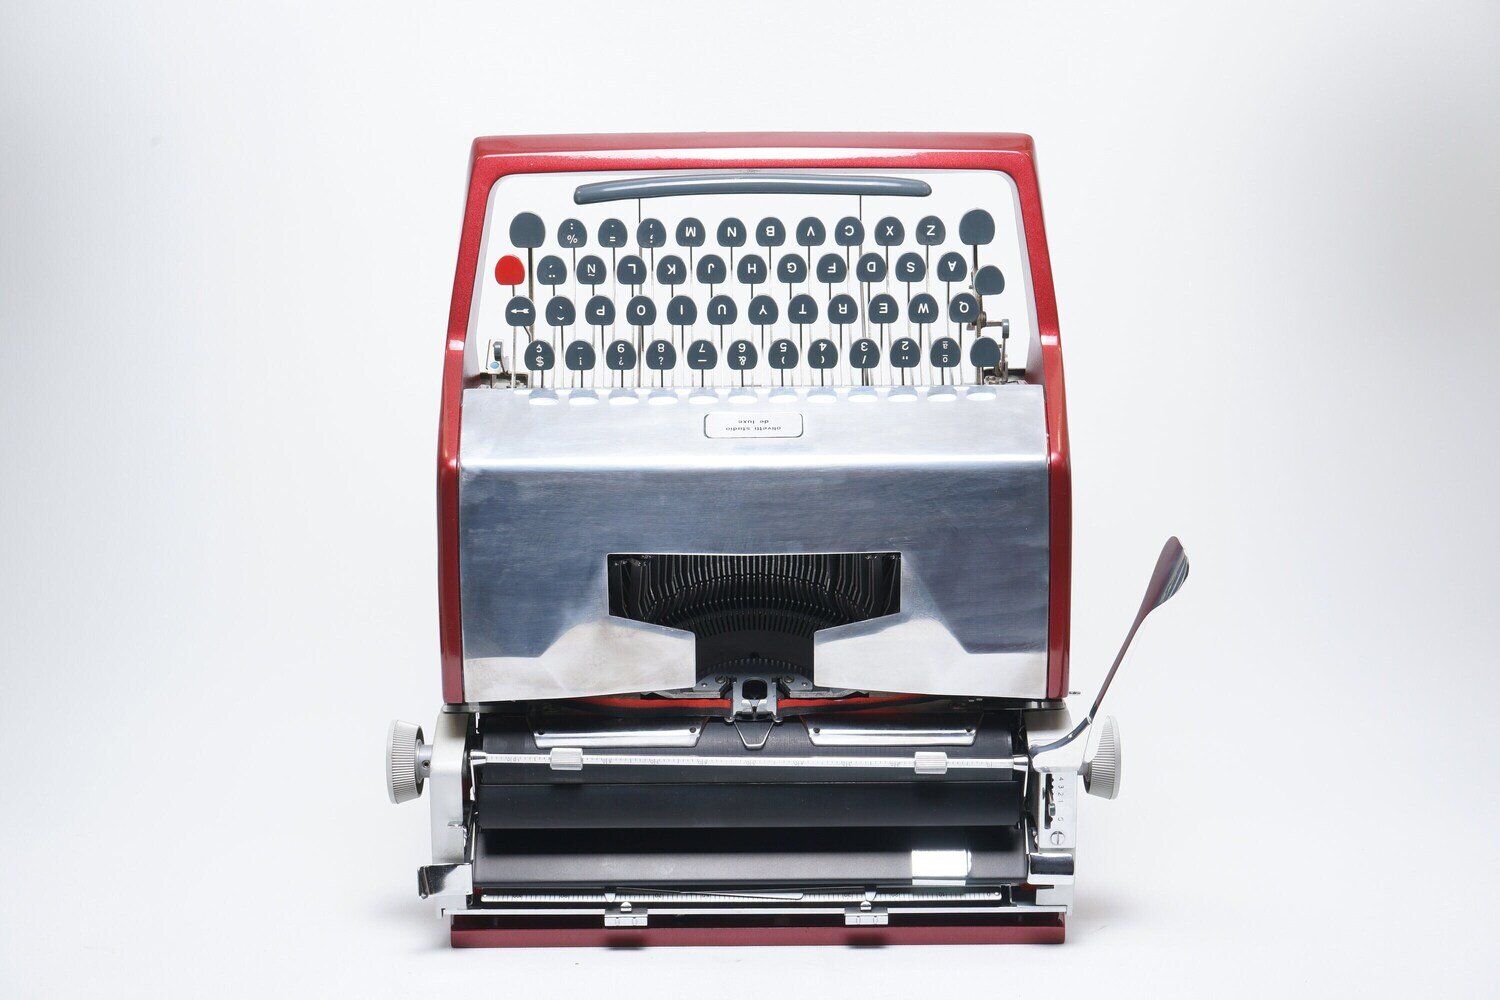 Limited Edition Olivetti Studio De Luxe Typewriter, Vintage, Manual Portable, Professionally Serviced by Typewriter.Company